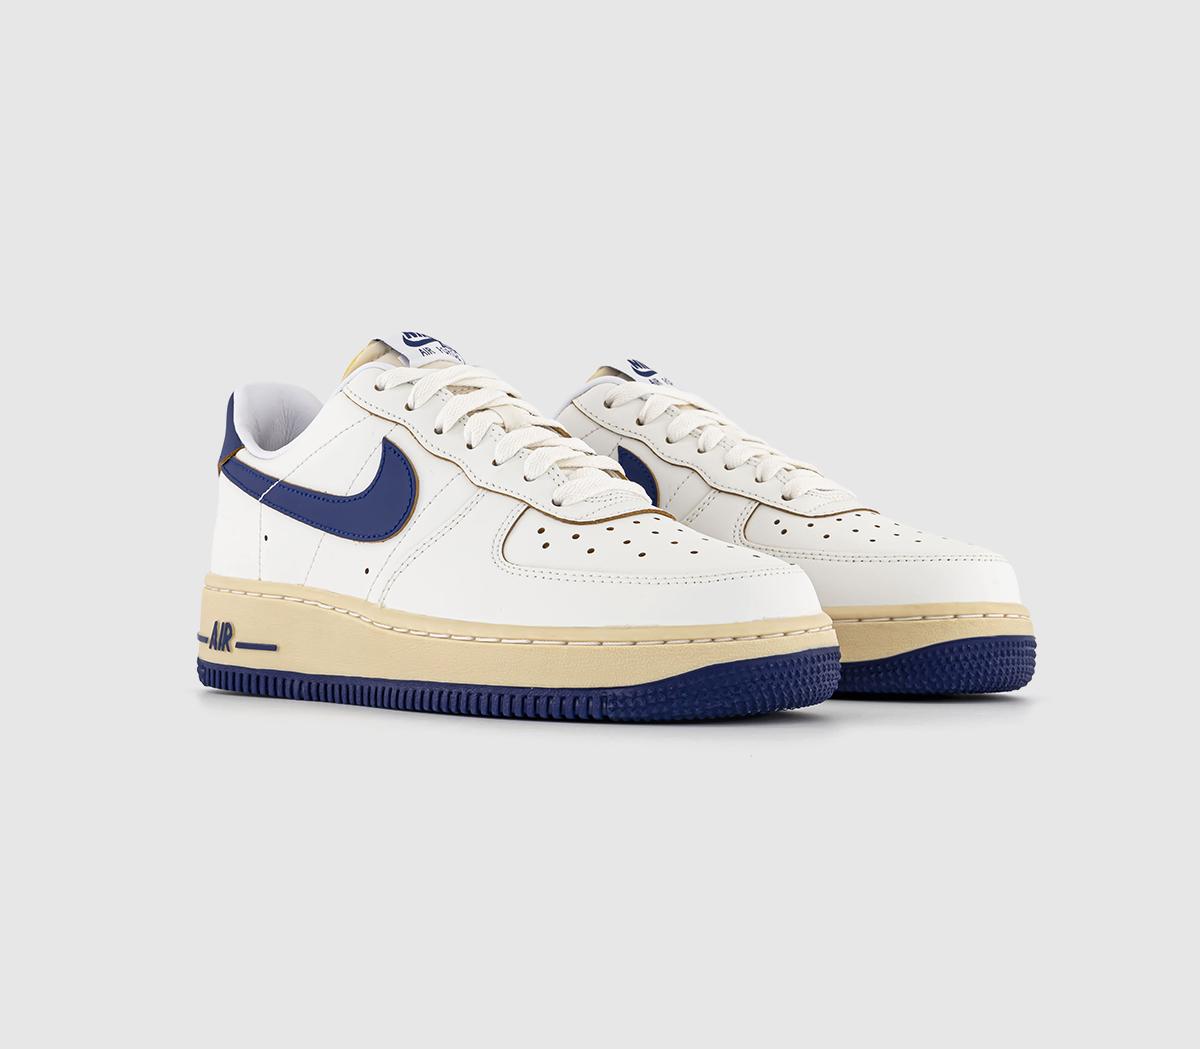 Nike Womens Air Force 1 07 Trainers Sail Deep Royal Blue Pale Vanilla Gold Suede White, 5